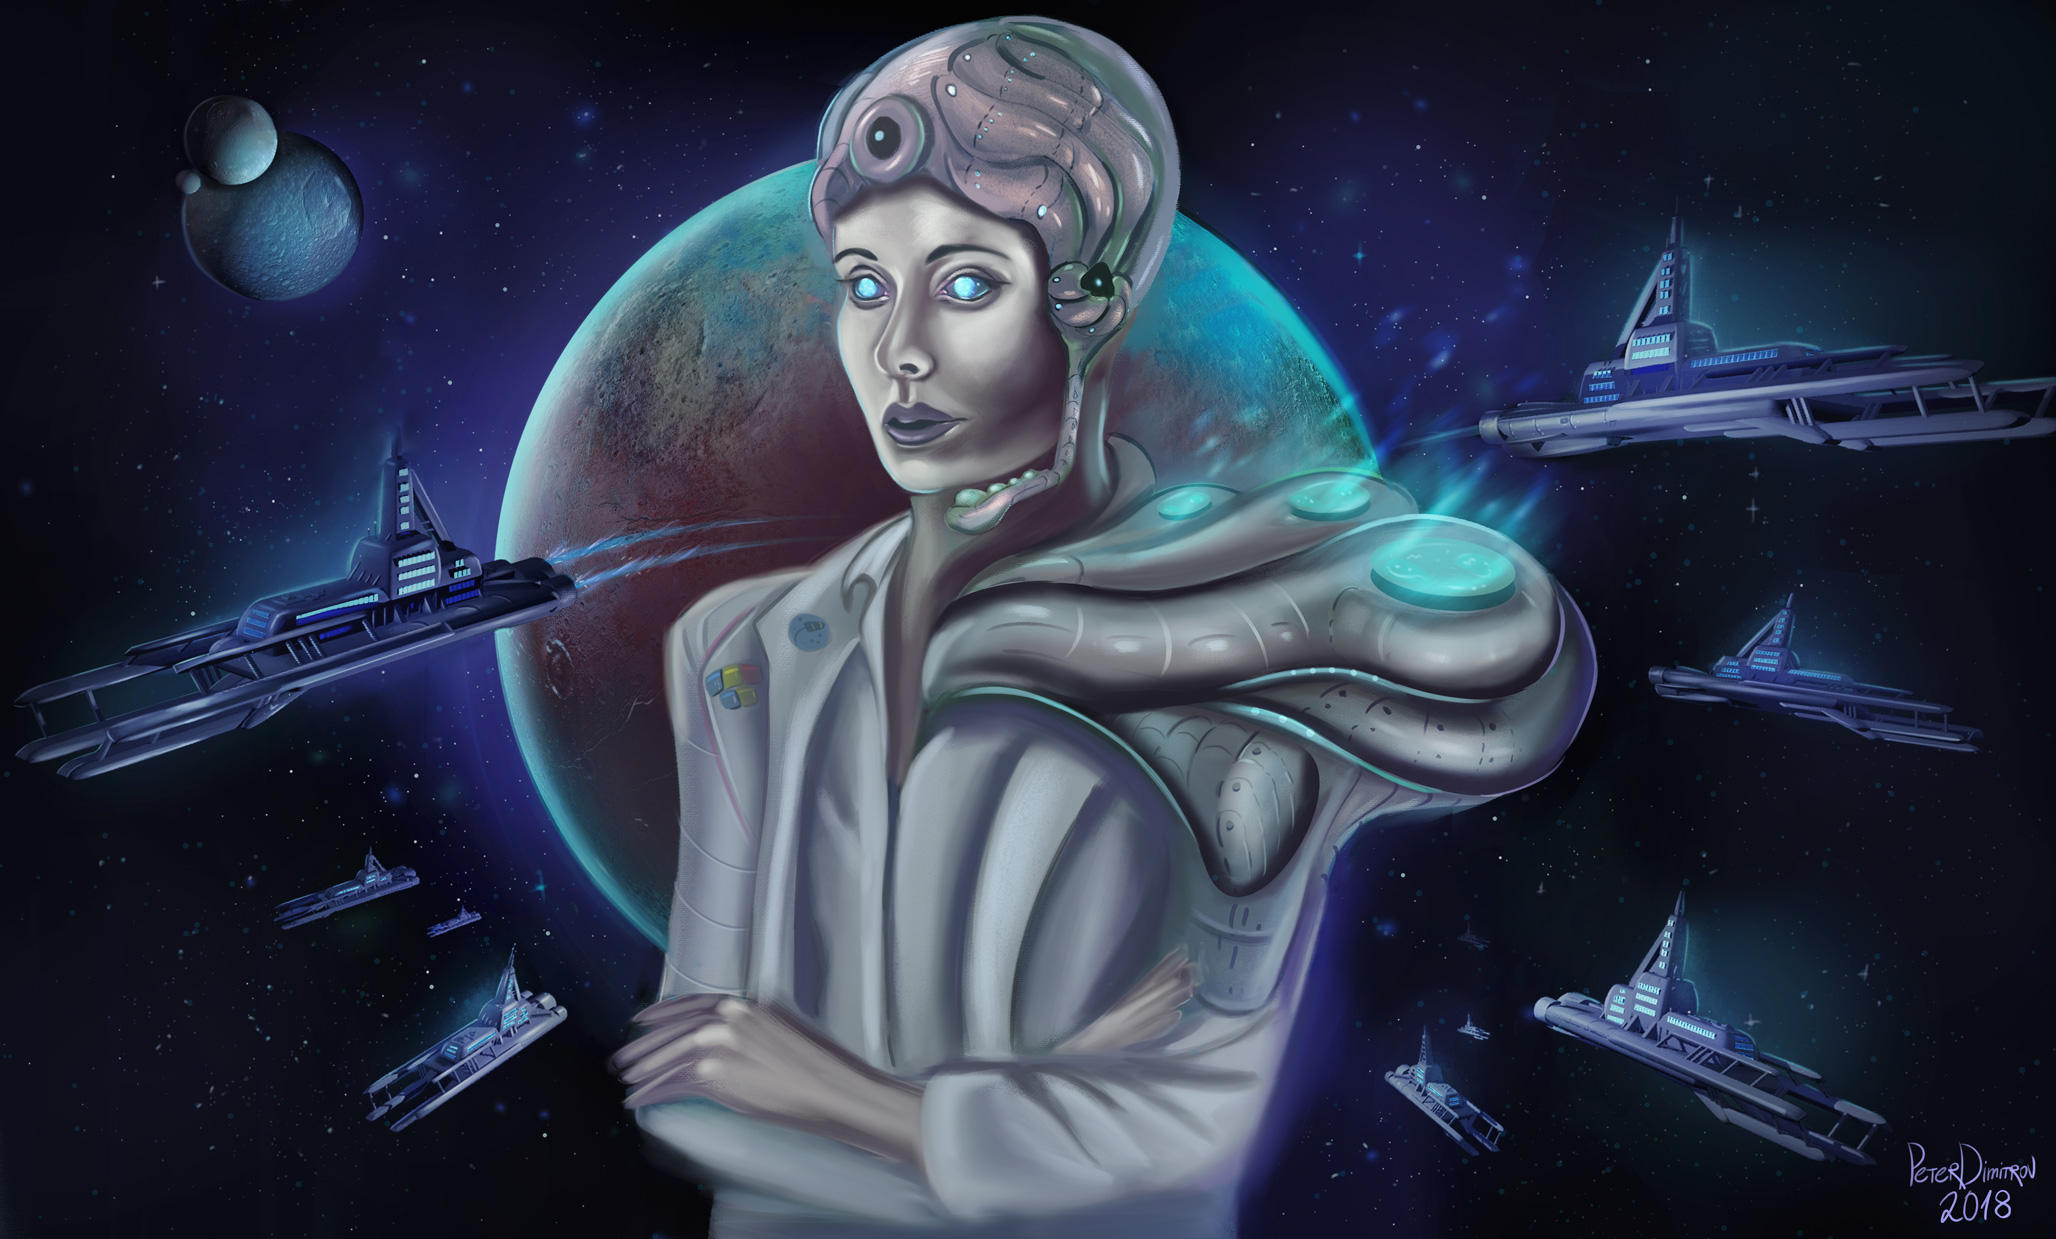 A woman dressed in a white shirt and an oversized, metal shoulder pad on her left. The shoulder pads has sci-fi panels and textures. There are also circular elements with teal, sci-fi glow on them. The woman has a headset with a microphone. Her eyes are hologram-like teal color. Behind her is a planet. In all directions, facing away from the planet as a center point, lots of large spaceships fly away. They are on a voyage towards the stars.